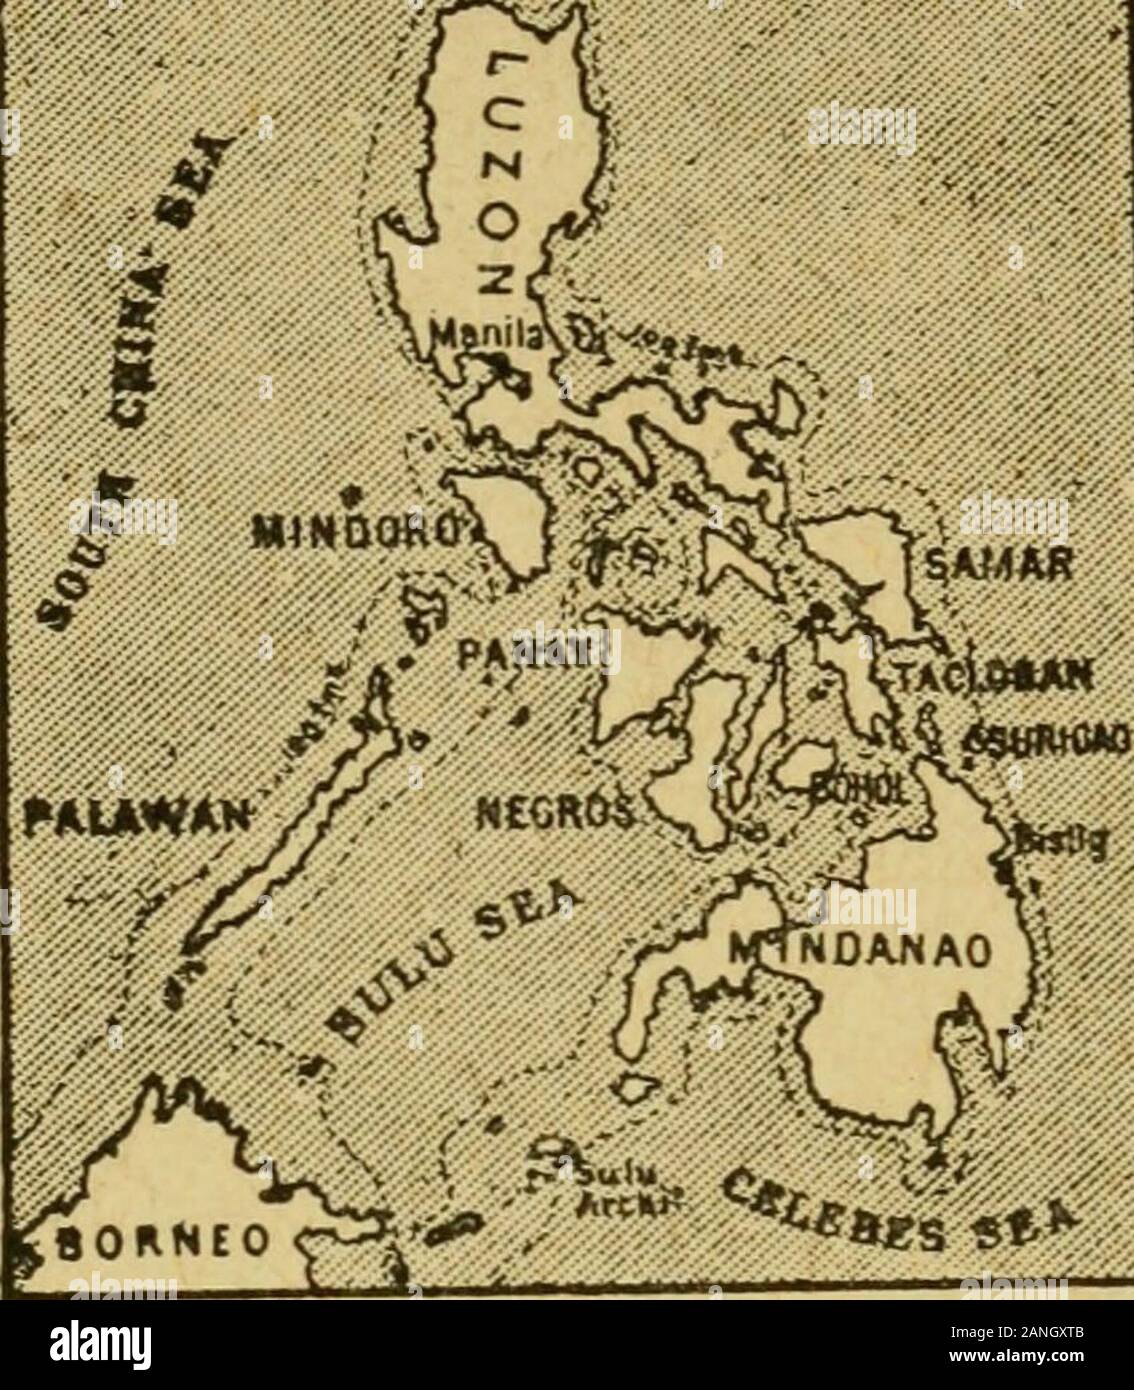 The international geography . r the Melanesians of the Solomon and New HebridesIslands, migrating westward into the eastern part of the Archipelago, partlysupplanted, partly commingled with the Negrito autochthones; and thenCaucasioid (Polynesian) pre-incursionists, whose strain appears still inmany of the people, as well in their language as in their customs.Throughout the Archipelago low Malay is the lingua franca on the coasts ;but each island has its own dialect, or language, and sometimes manylanguages are spoken in one island. Political Divisions.—Politically the Archipelago was long div Stock Photo